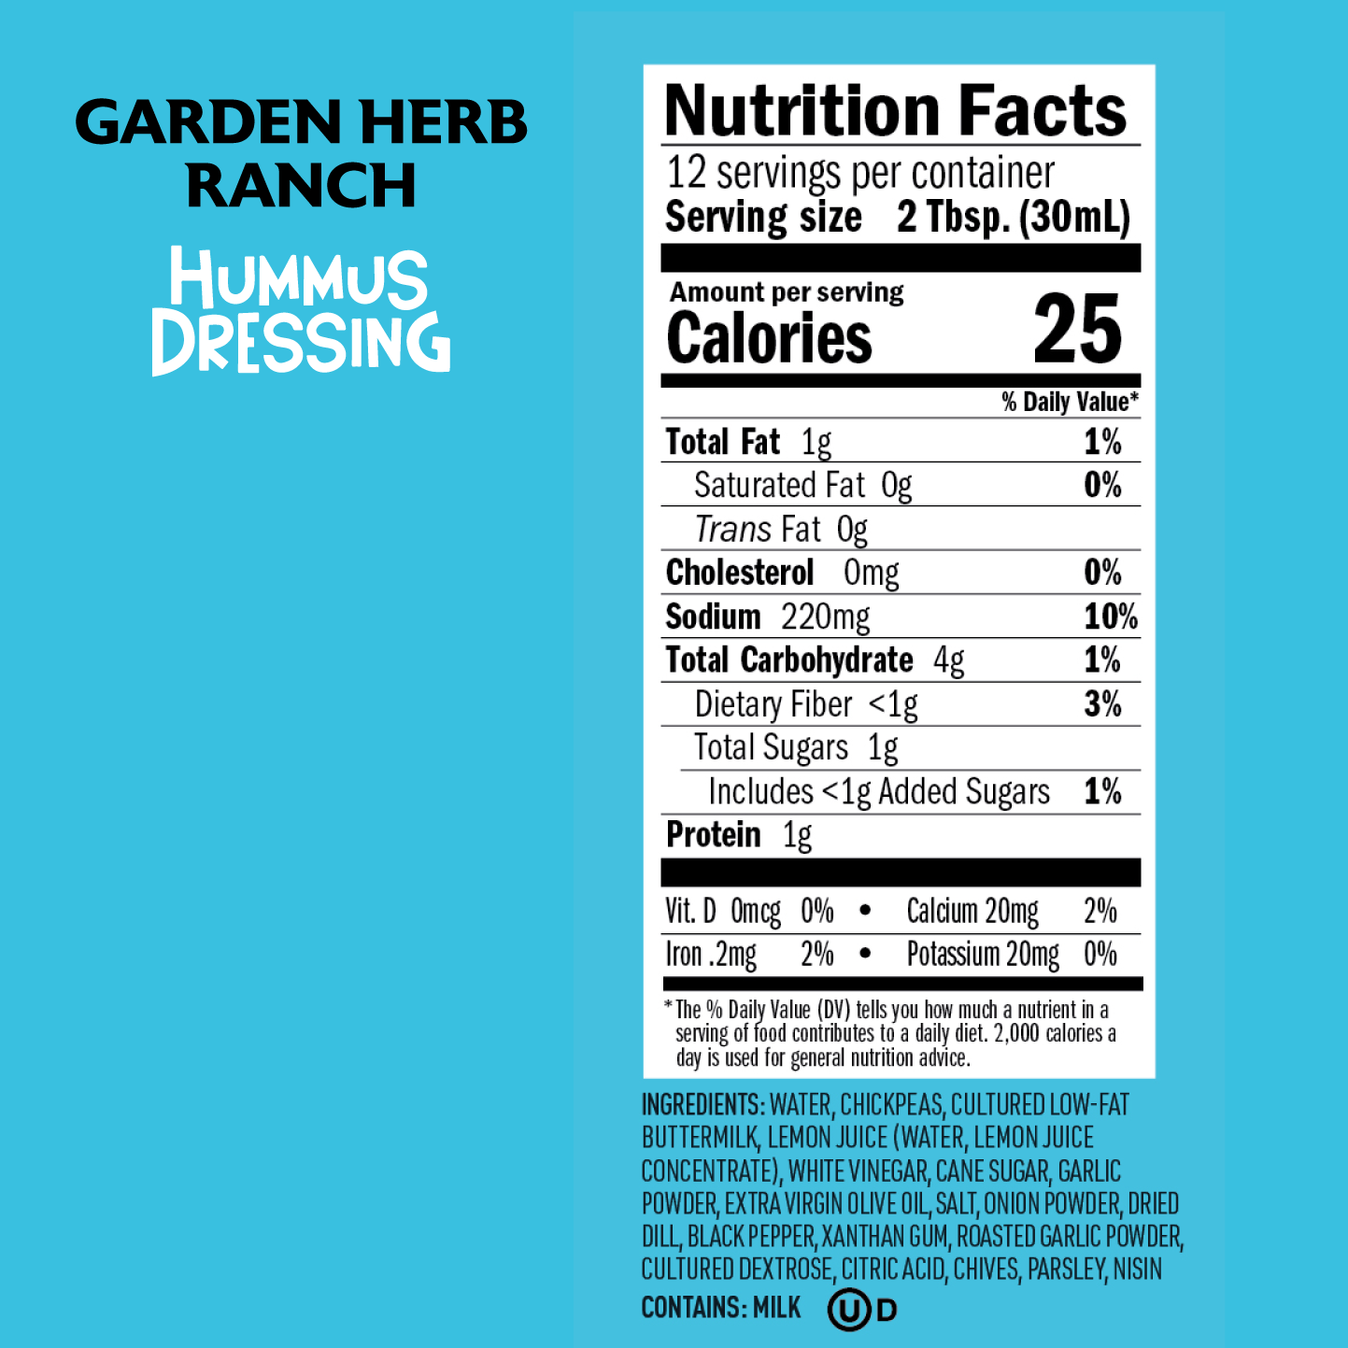 Nutrition facts for Garden Herb Ranch chickpea based salad dressing. Low calorie, clean label, and low fat. 